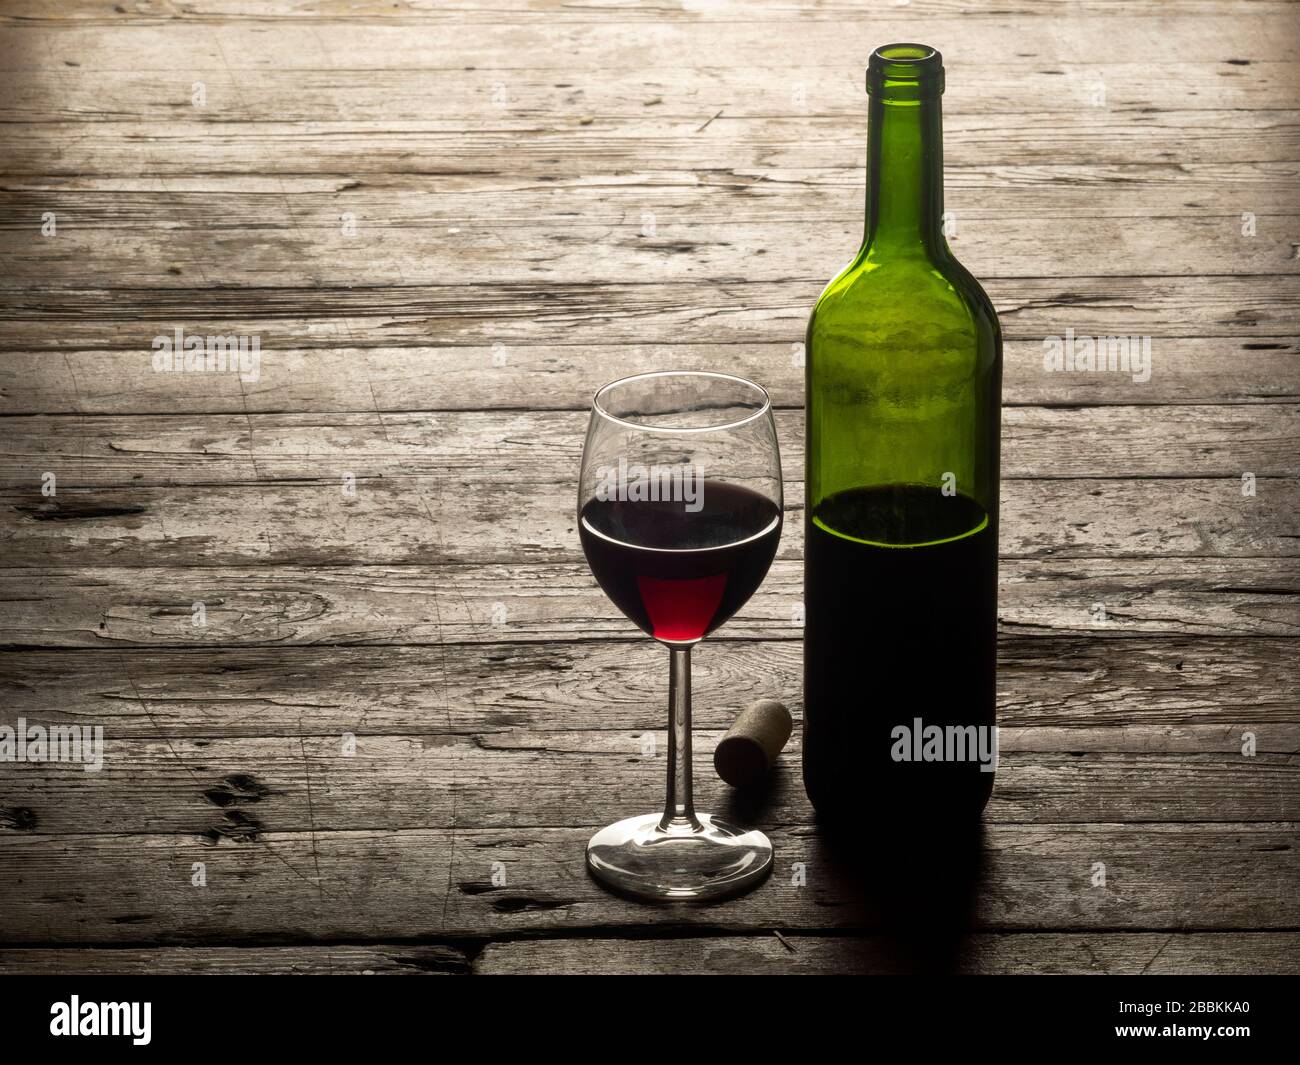 red wine bottle and glass closeup horizontal background Stock Photo